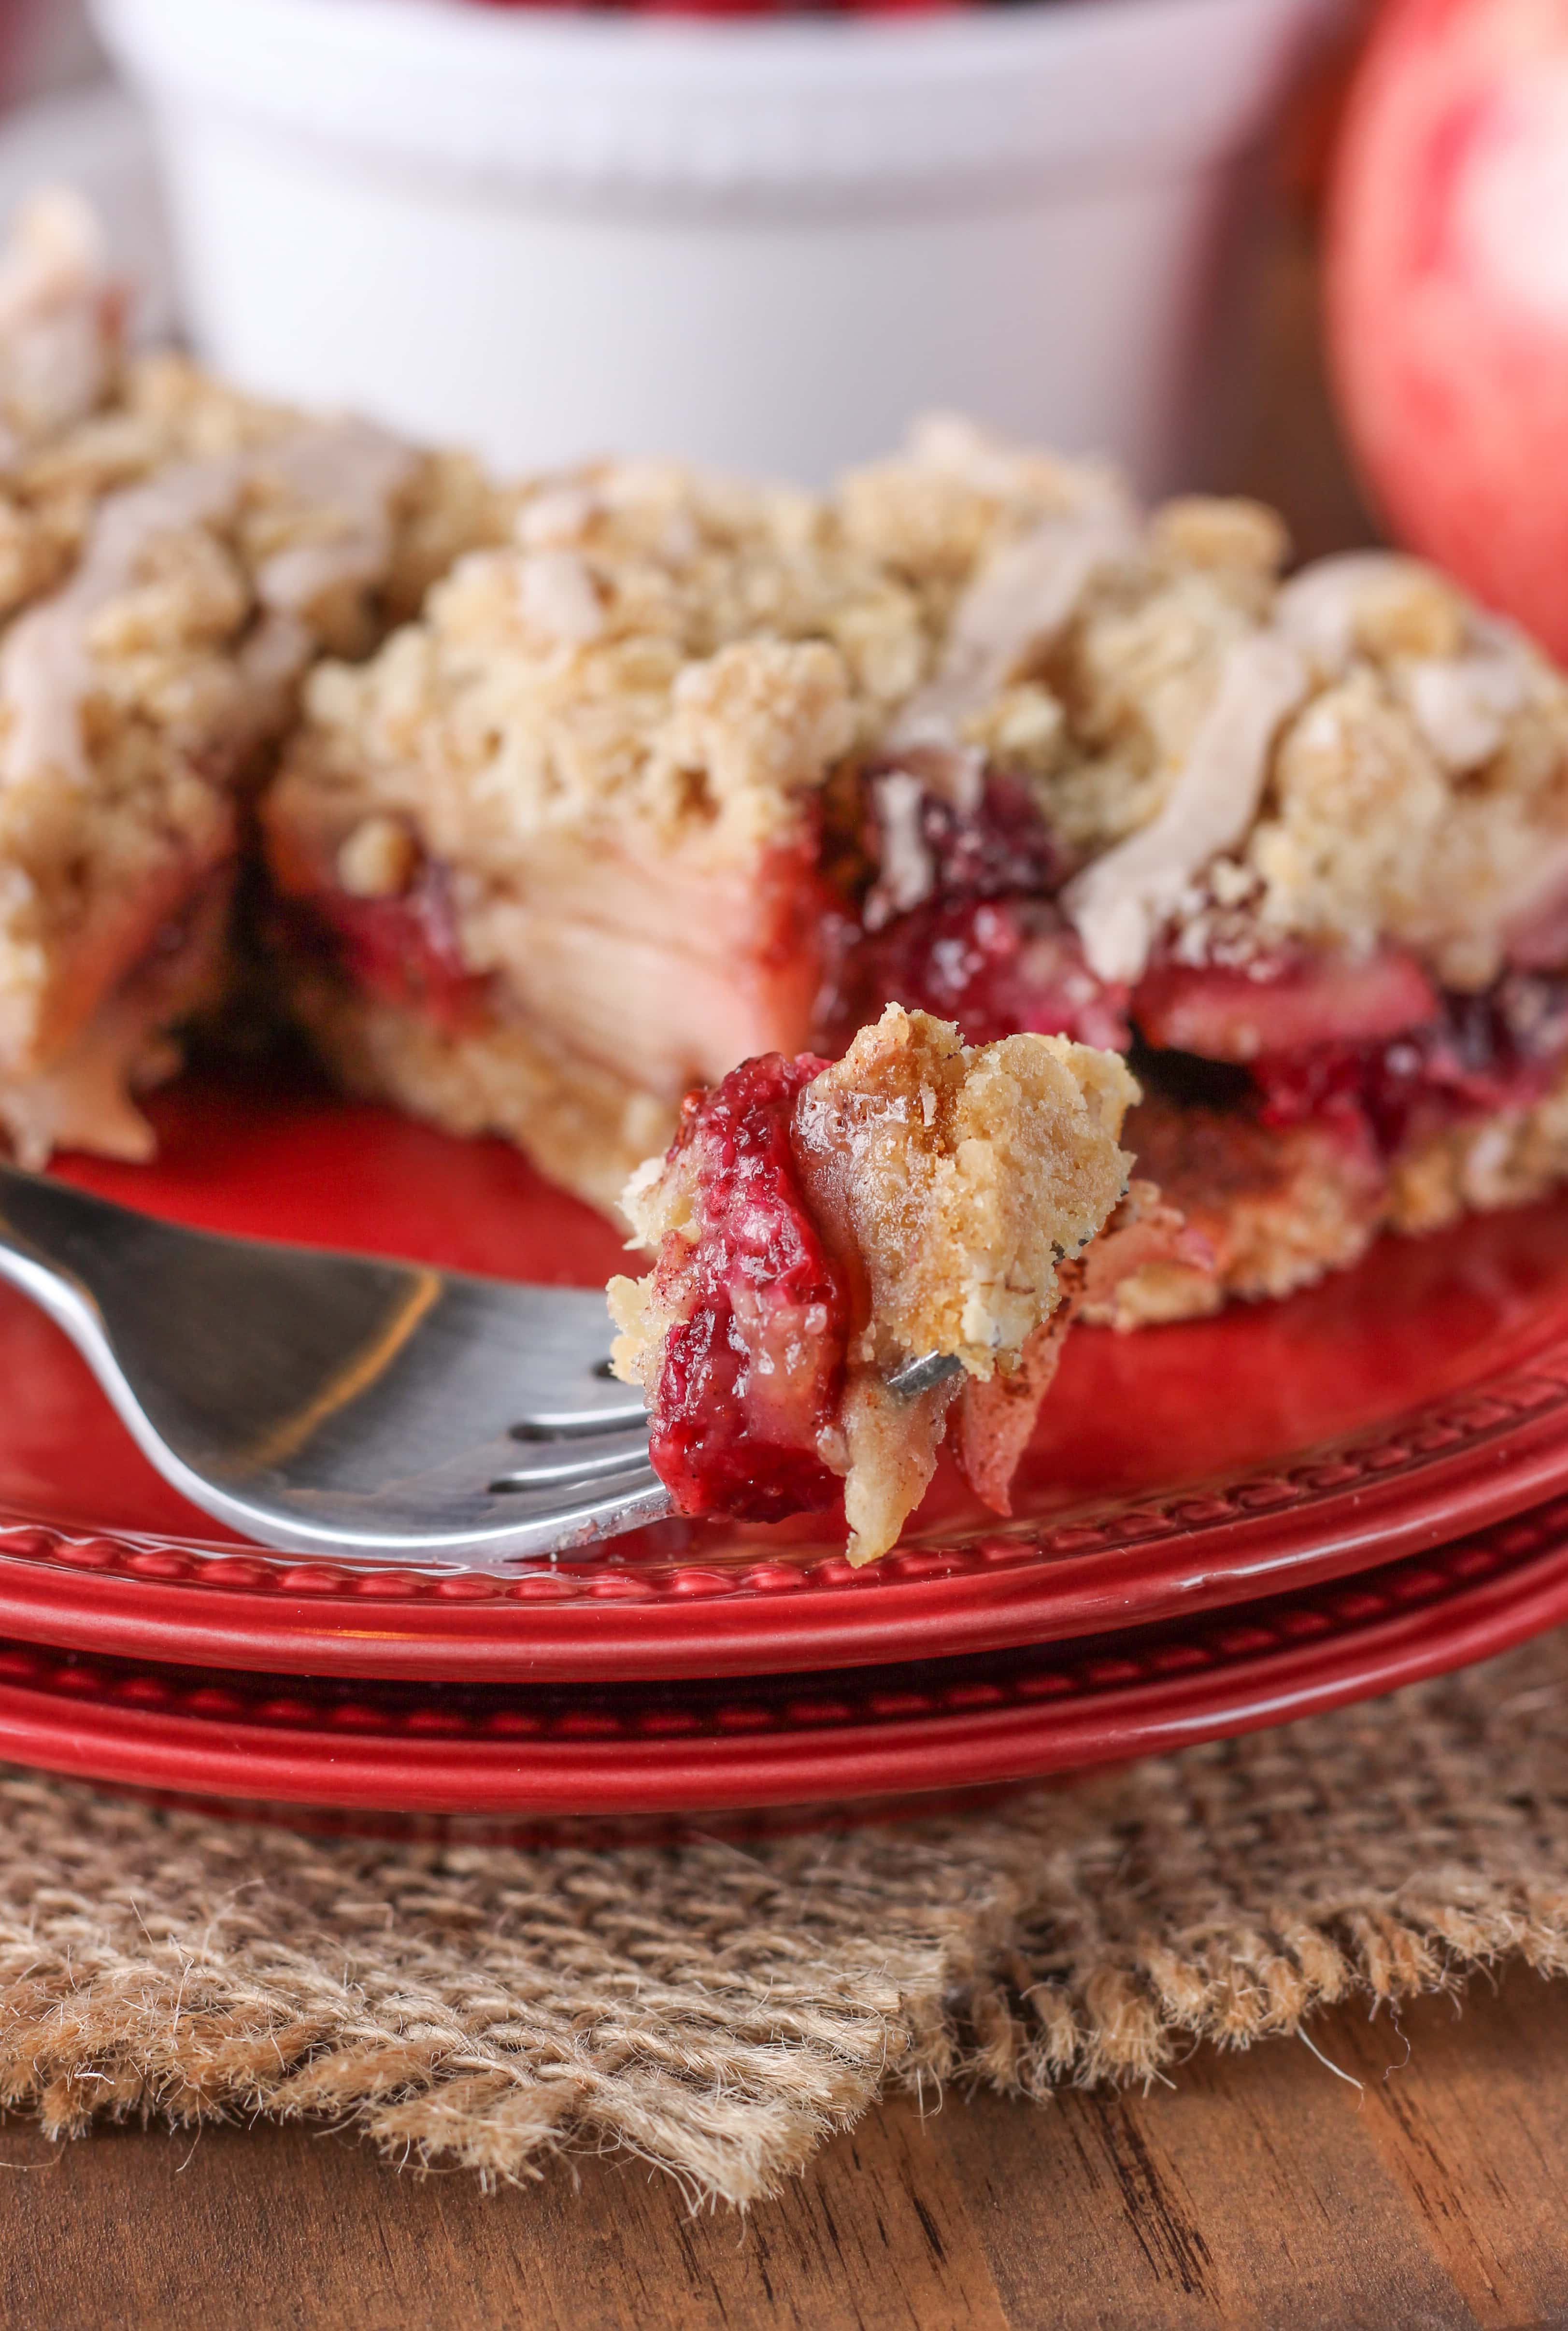 Honey Cranberry Apple Crumb Bars Recipe from A Kitchen Addiction